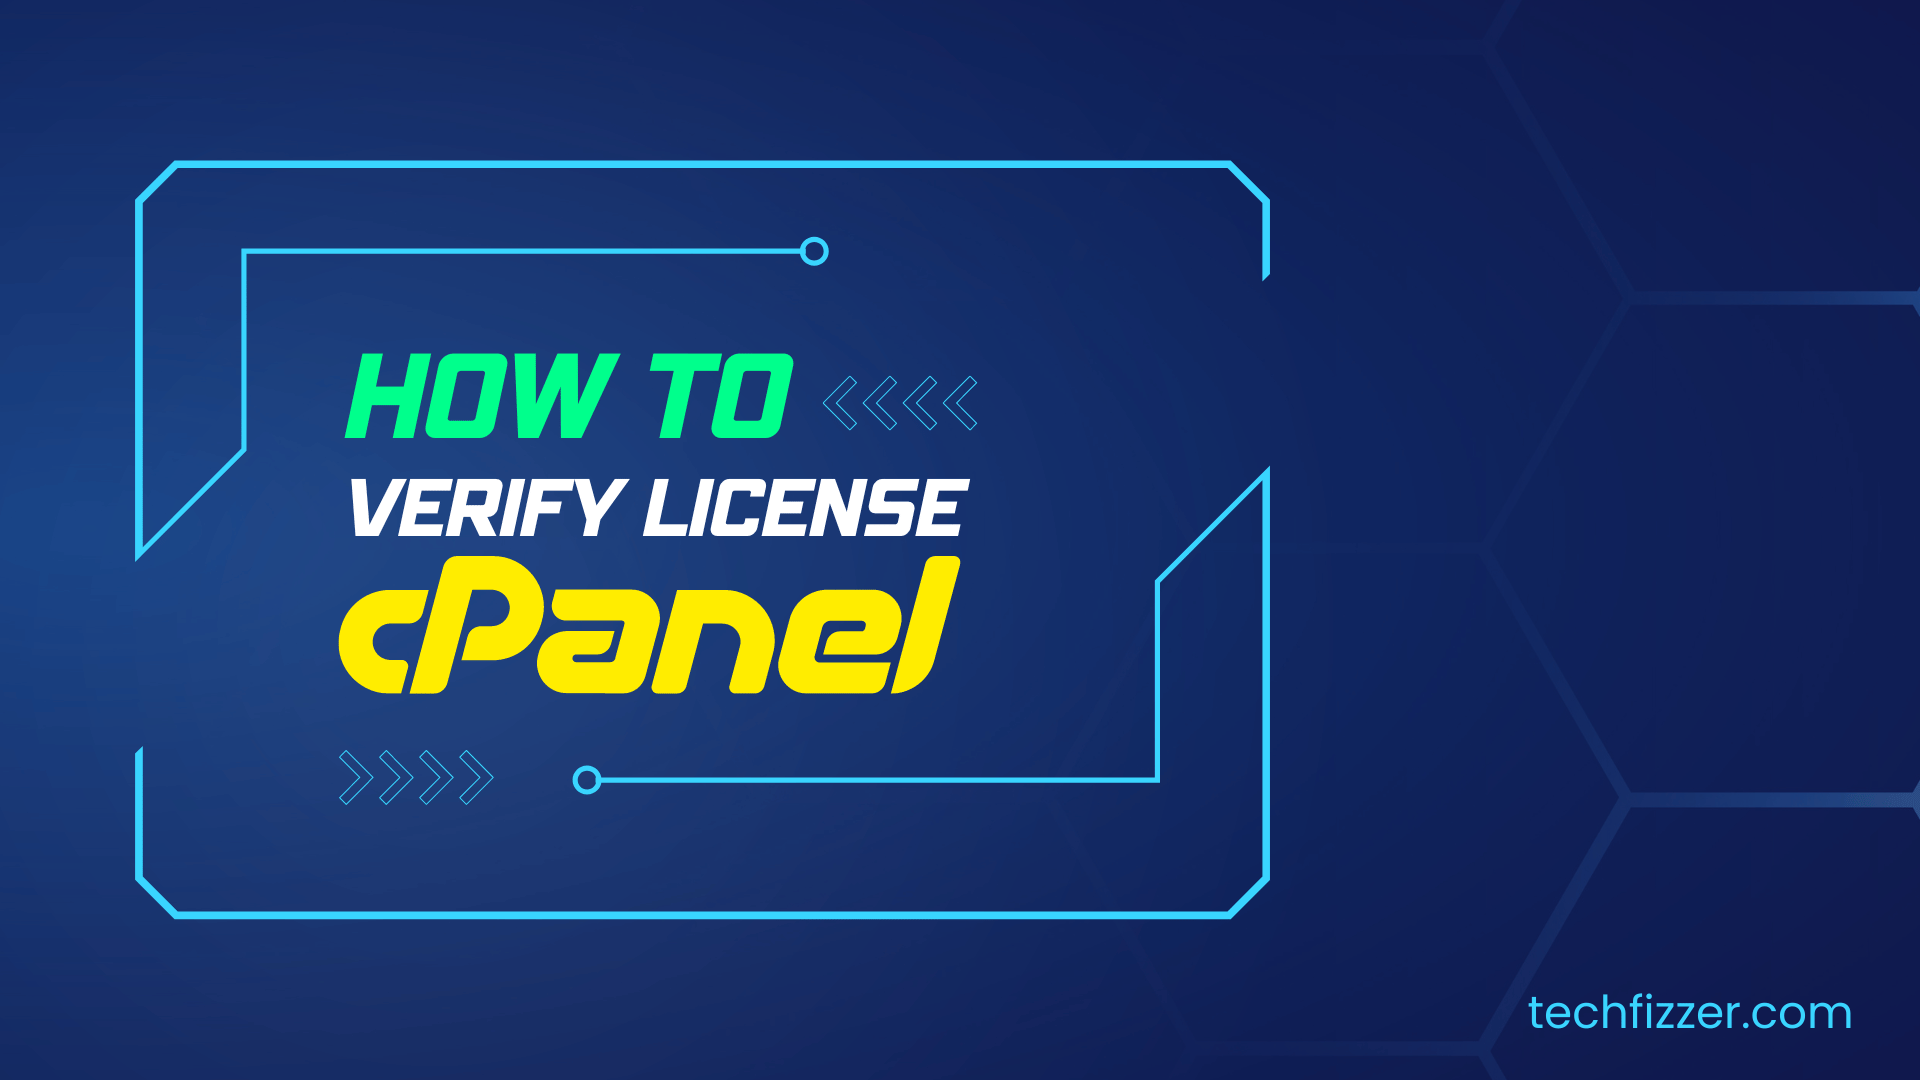 How to verify the cPanel License